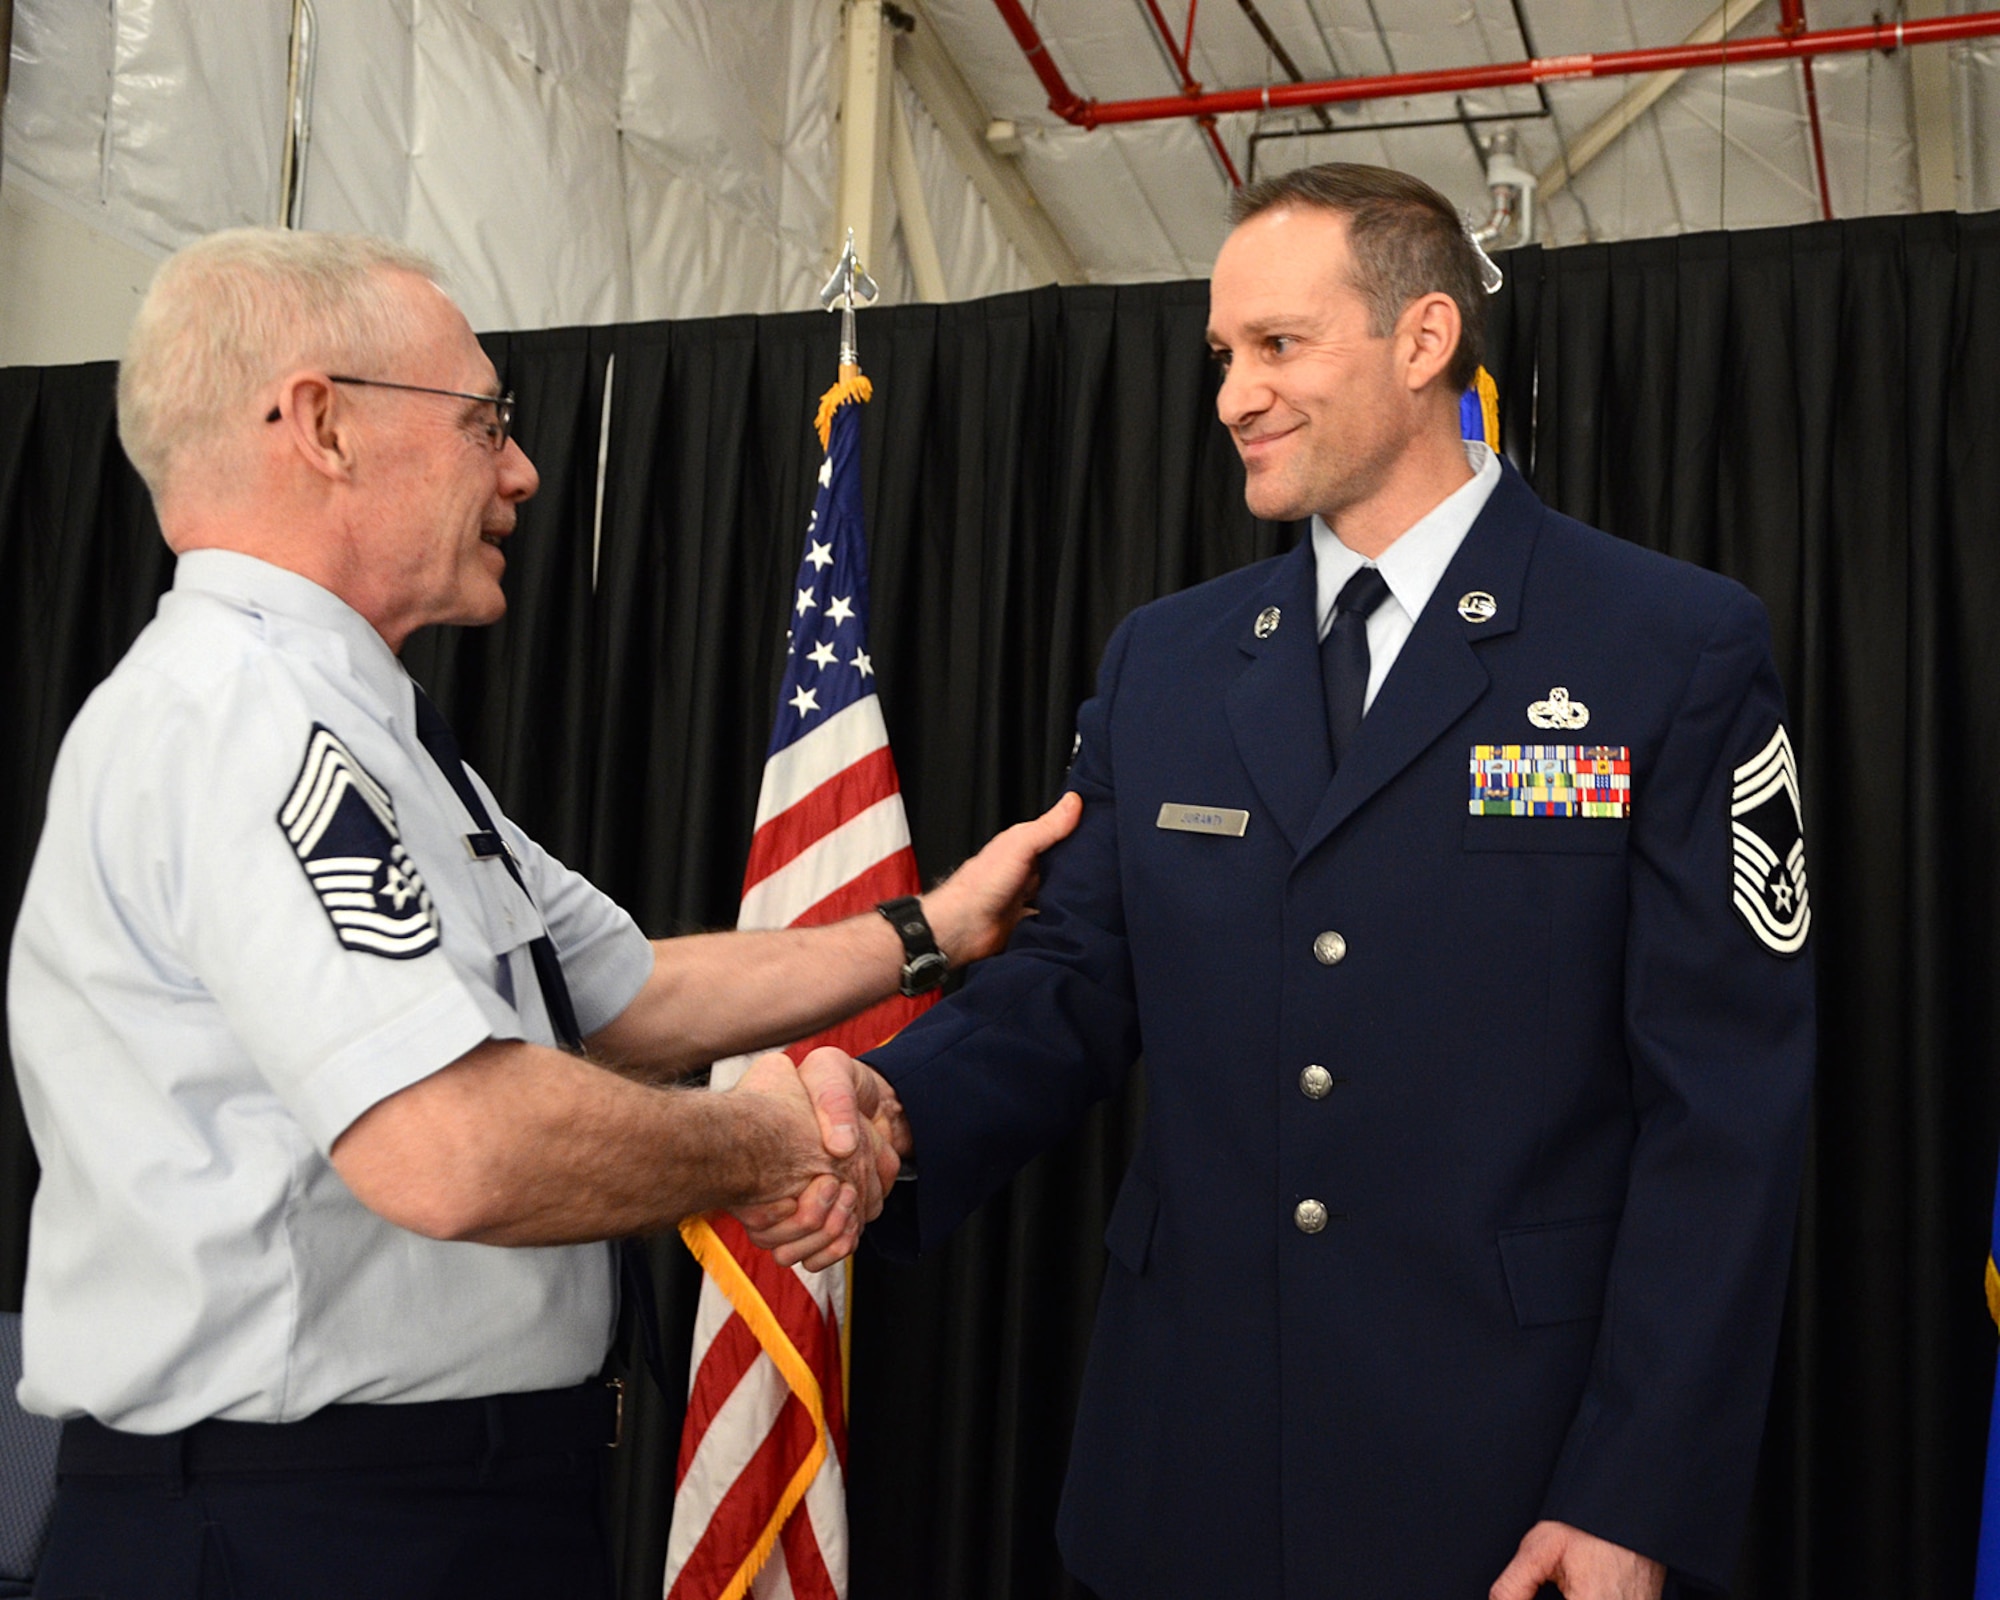 PEASE AIR NATIONAL GUARD BASE, N.H. -- Chief Master Sgt. John M. Menton, 157th Maintenance Group, congratulates newly promoted Chief Master Sgt. Michael W. Juranty, also assigned to the 157th Maintenance Group, upon his promotion to the enlisted force's most senior rank, March 9, 2014. Juranty is a traditional member of the maintenance group and the first to hold the enlisted position in more four years. (N.H. National Guard photo by Tech. Sgt. Mark Wyatt/RELEASED)